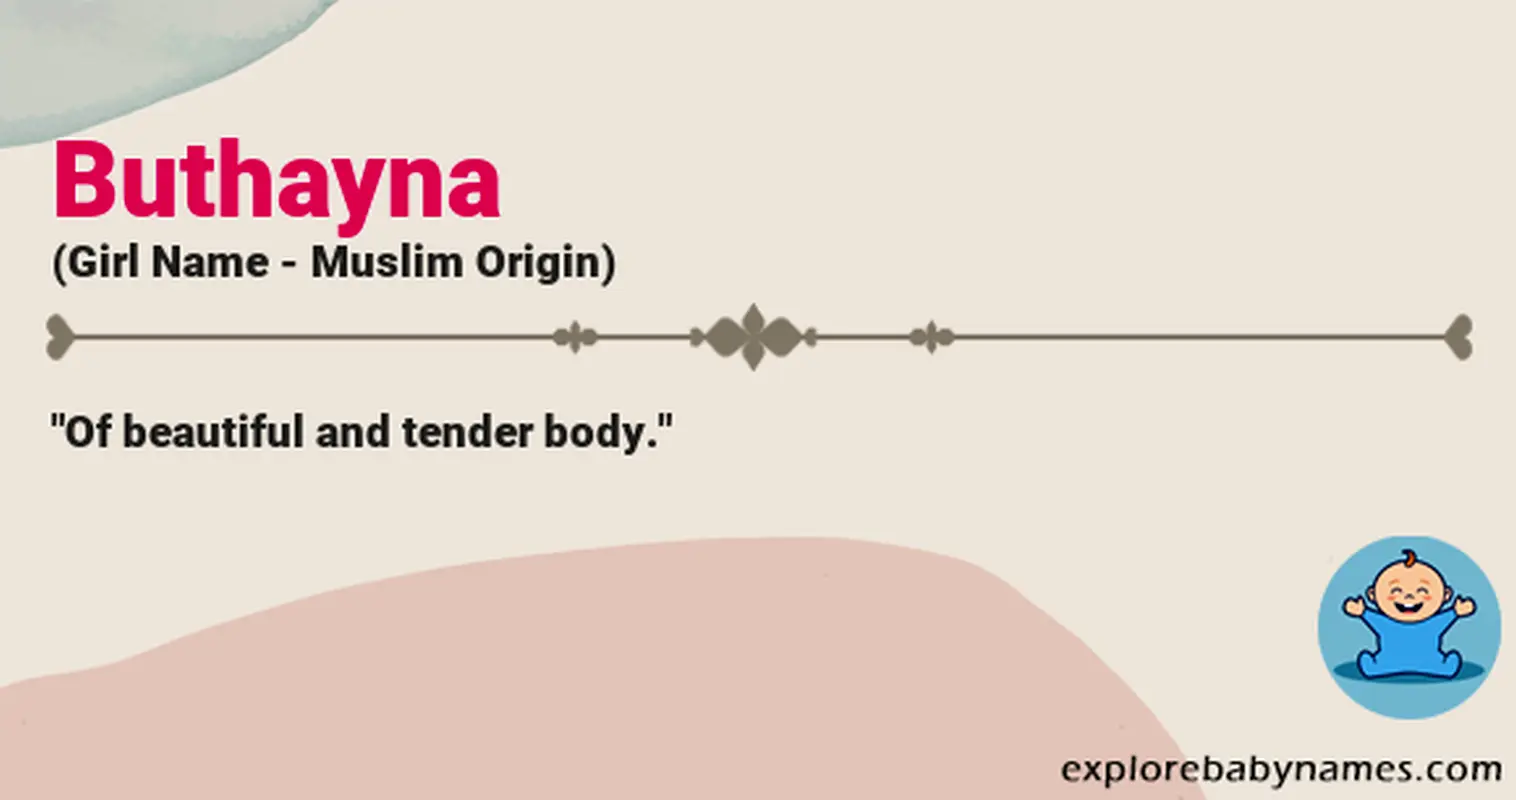 Meaning of Buthayna